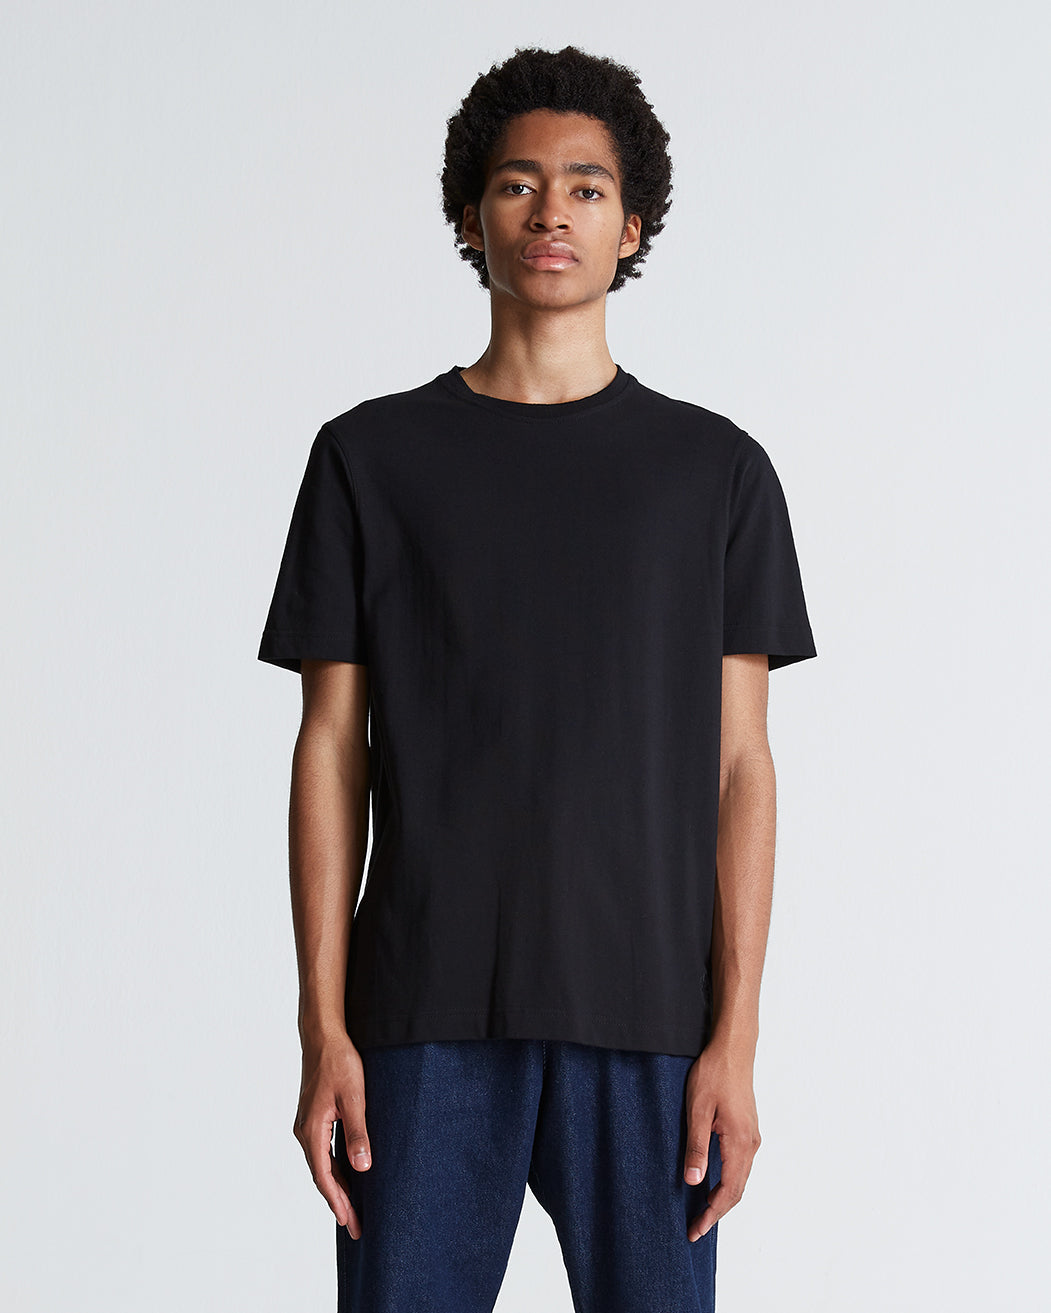 The Cotton Pique Tee in Black Beauty